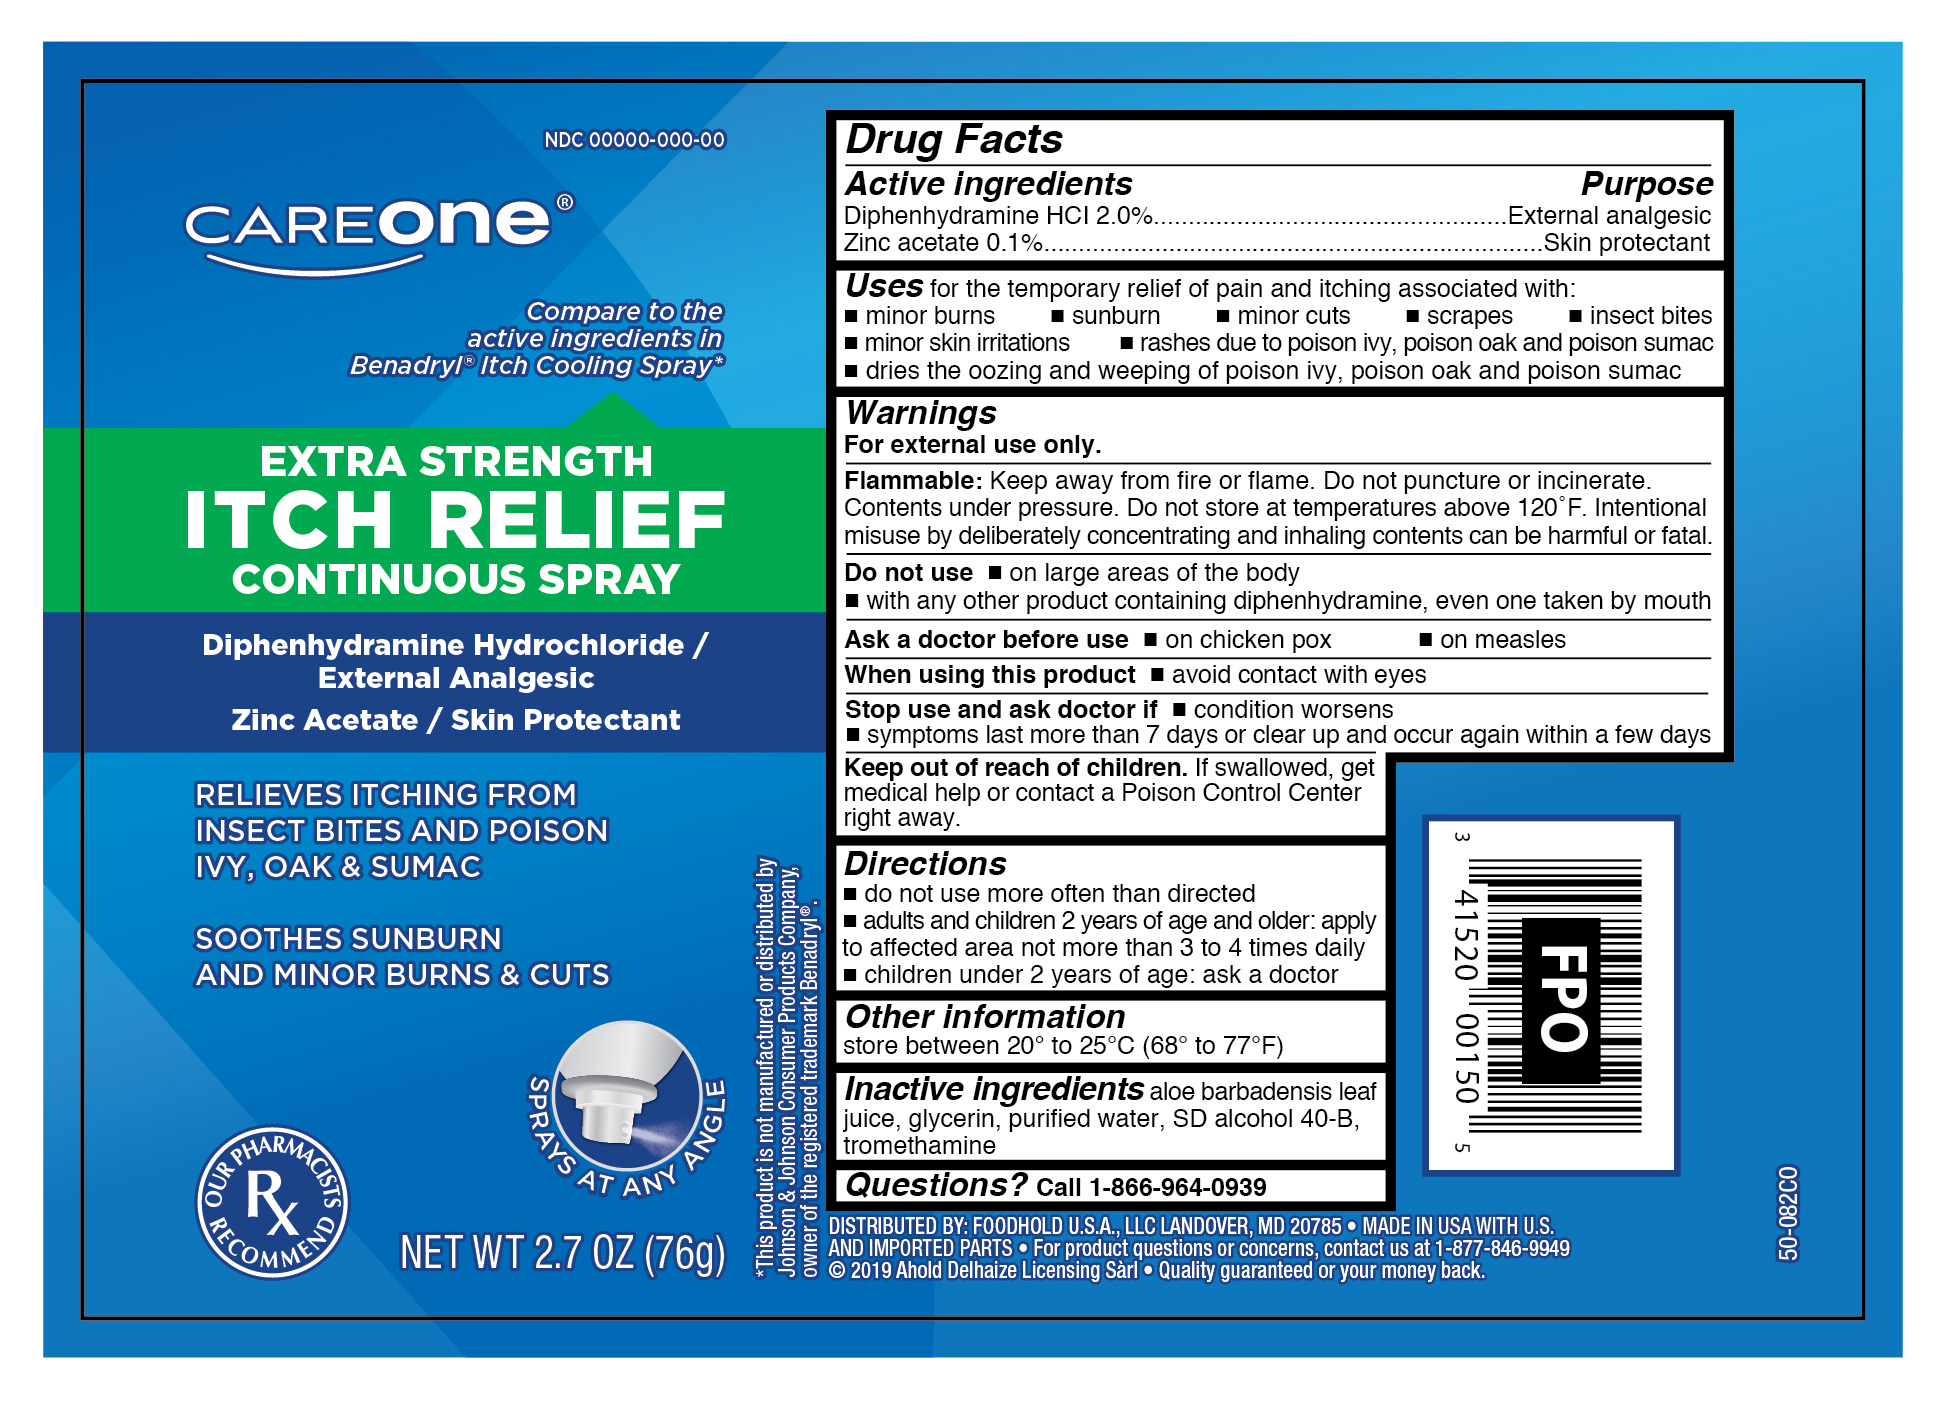 Careone Itch Relief Continuous Spray